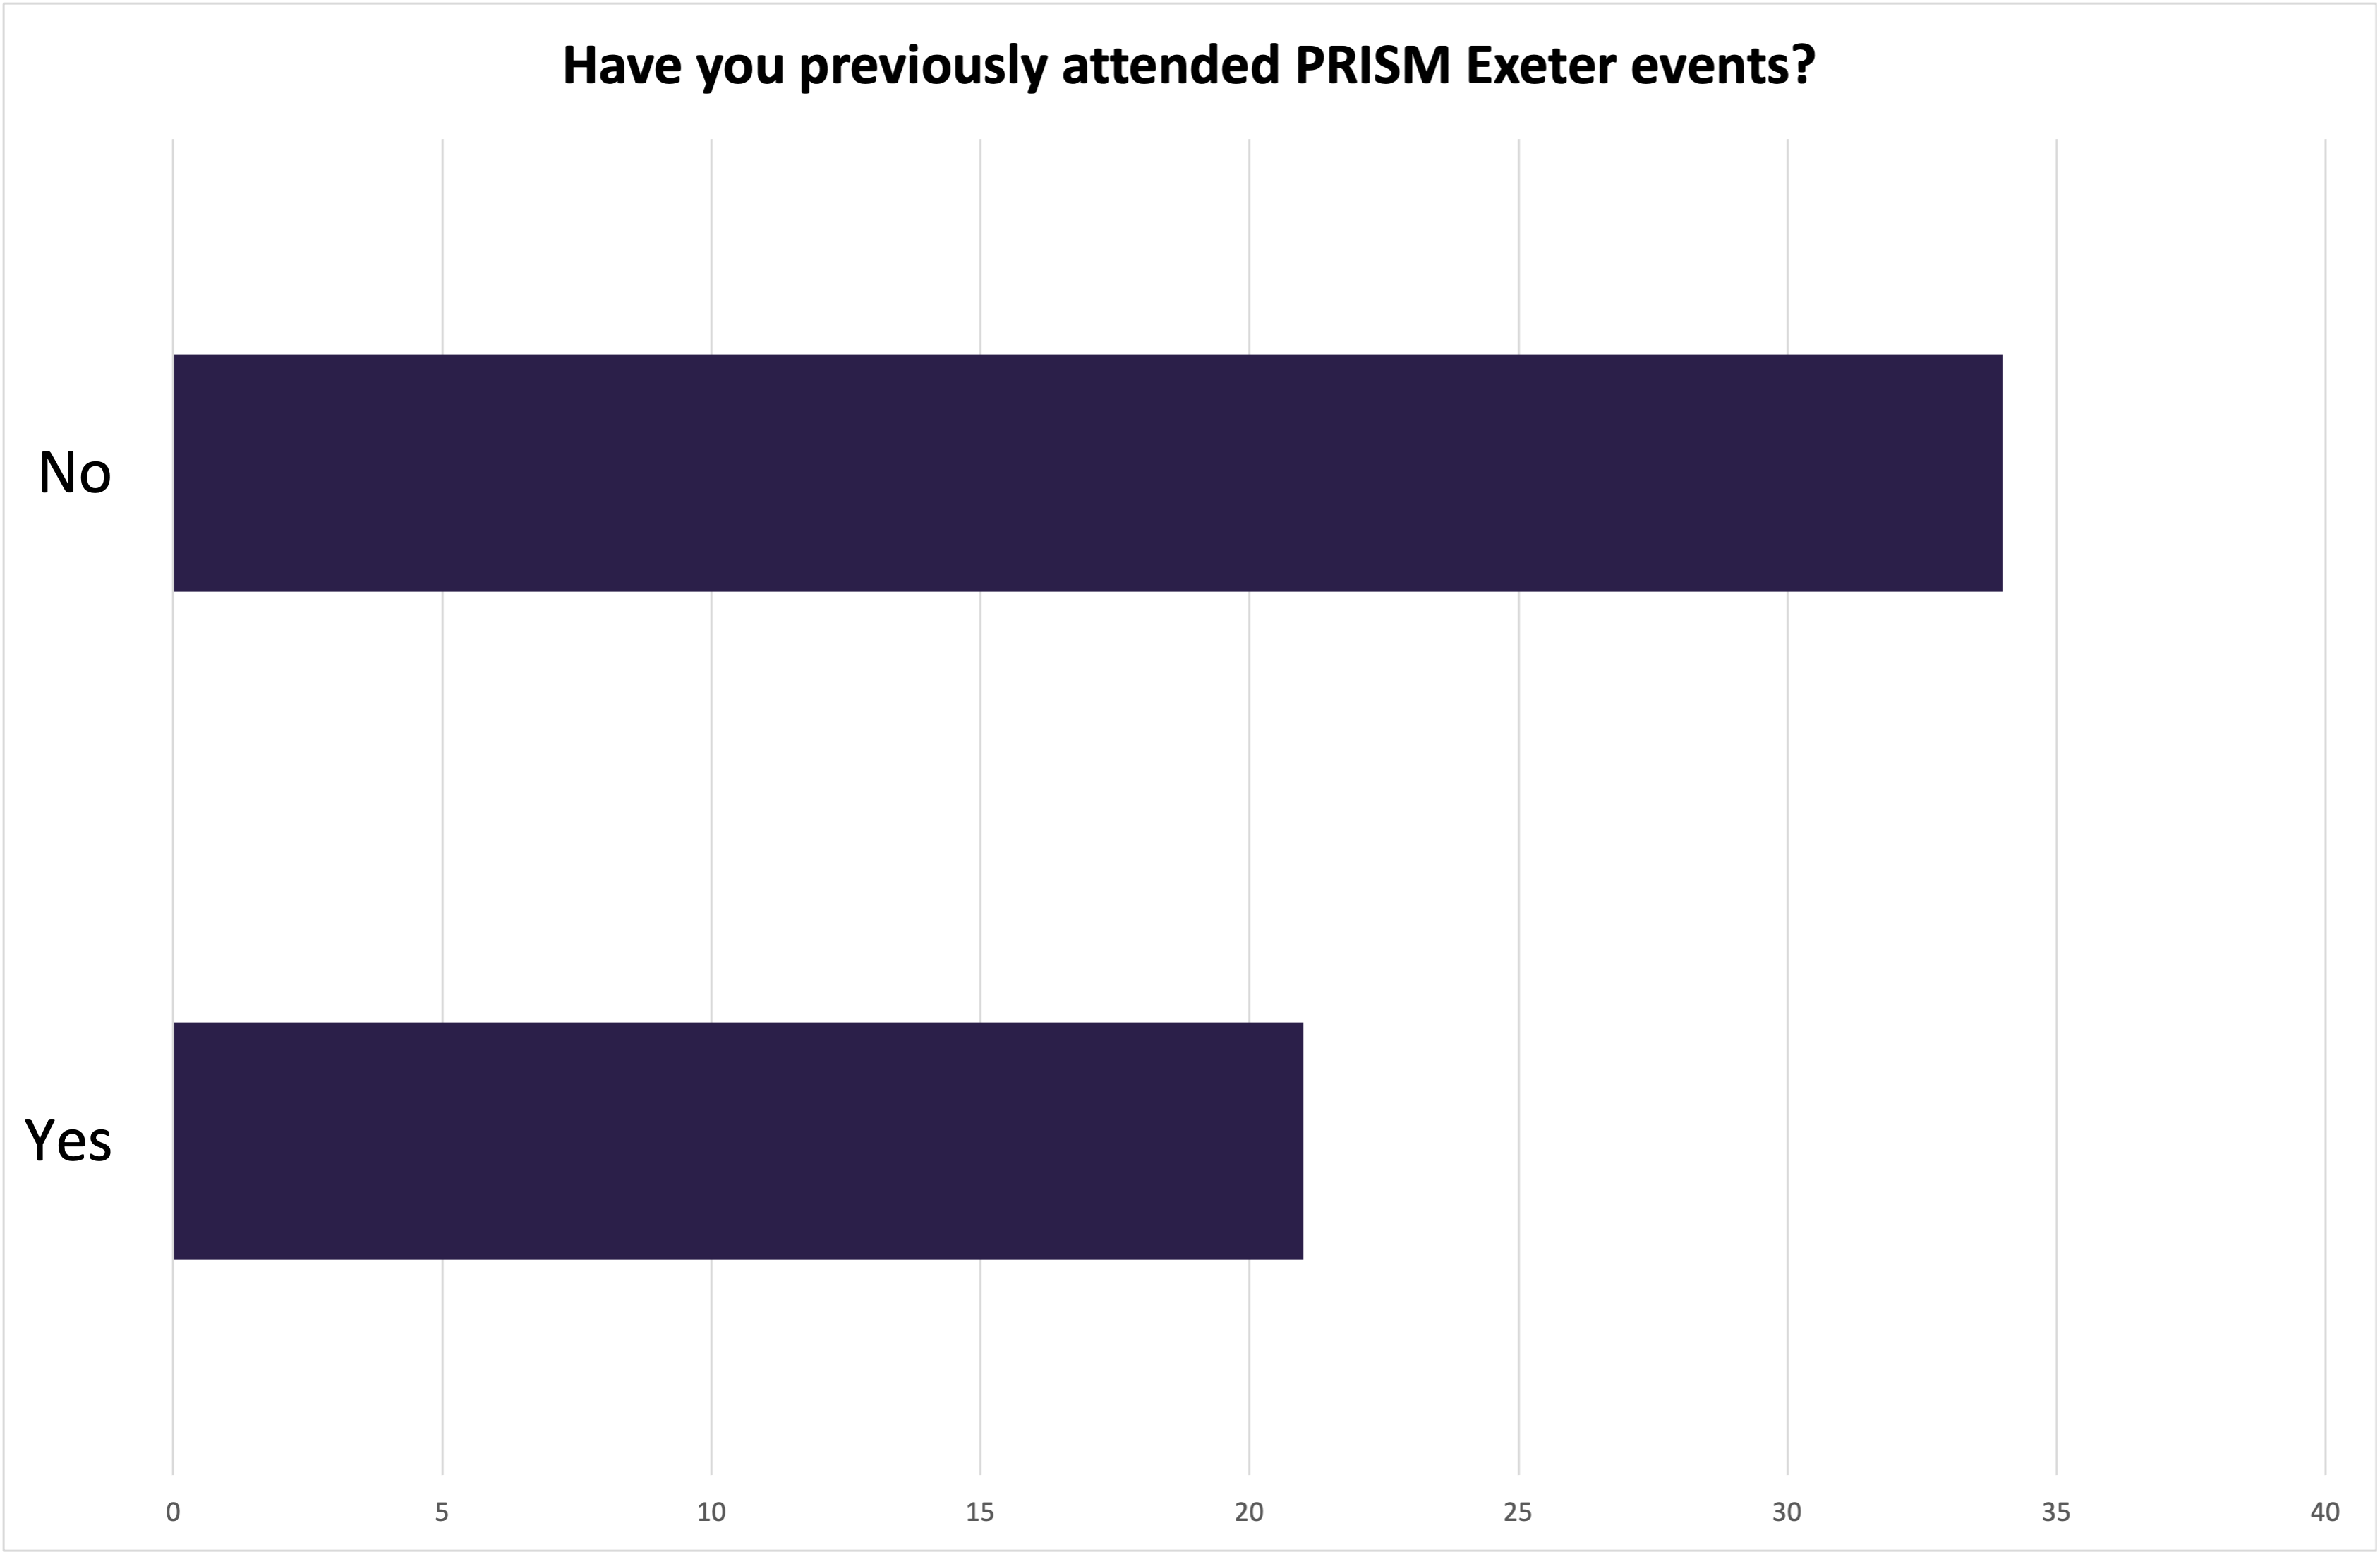 Bar chart of attendee's answers to the question of whether they had previously attended a PRISM Exeter event before: yes (21); no (34)